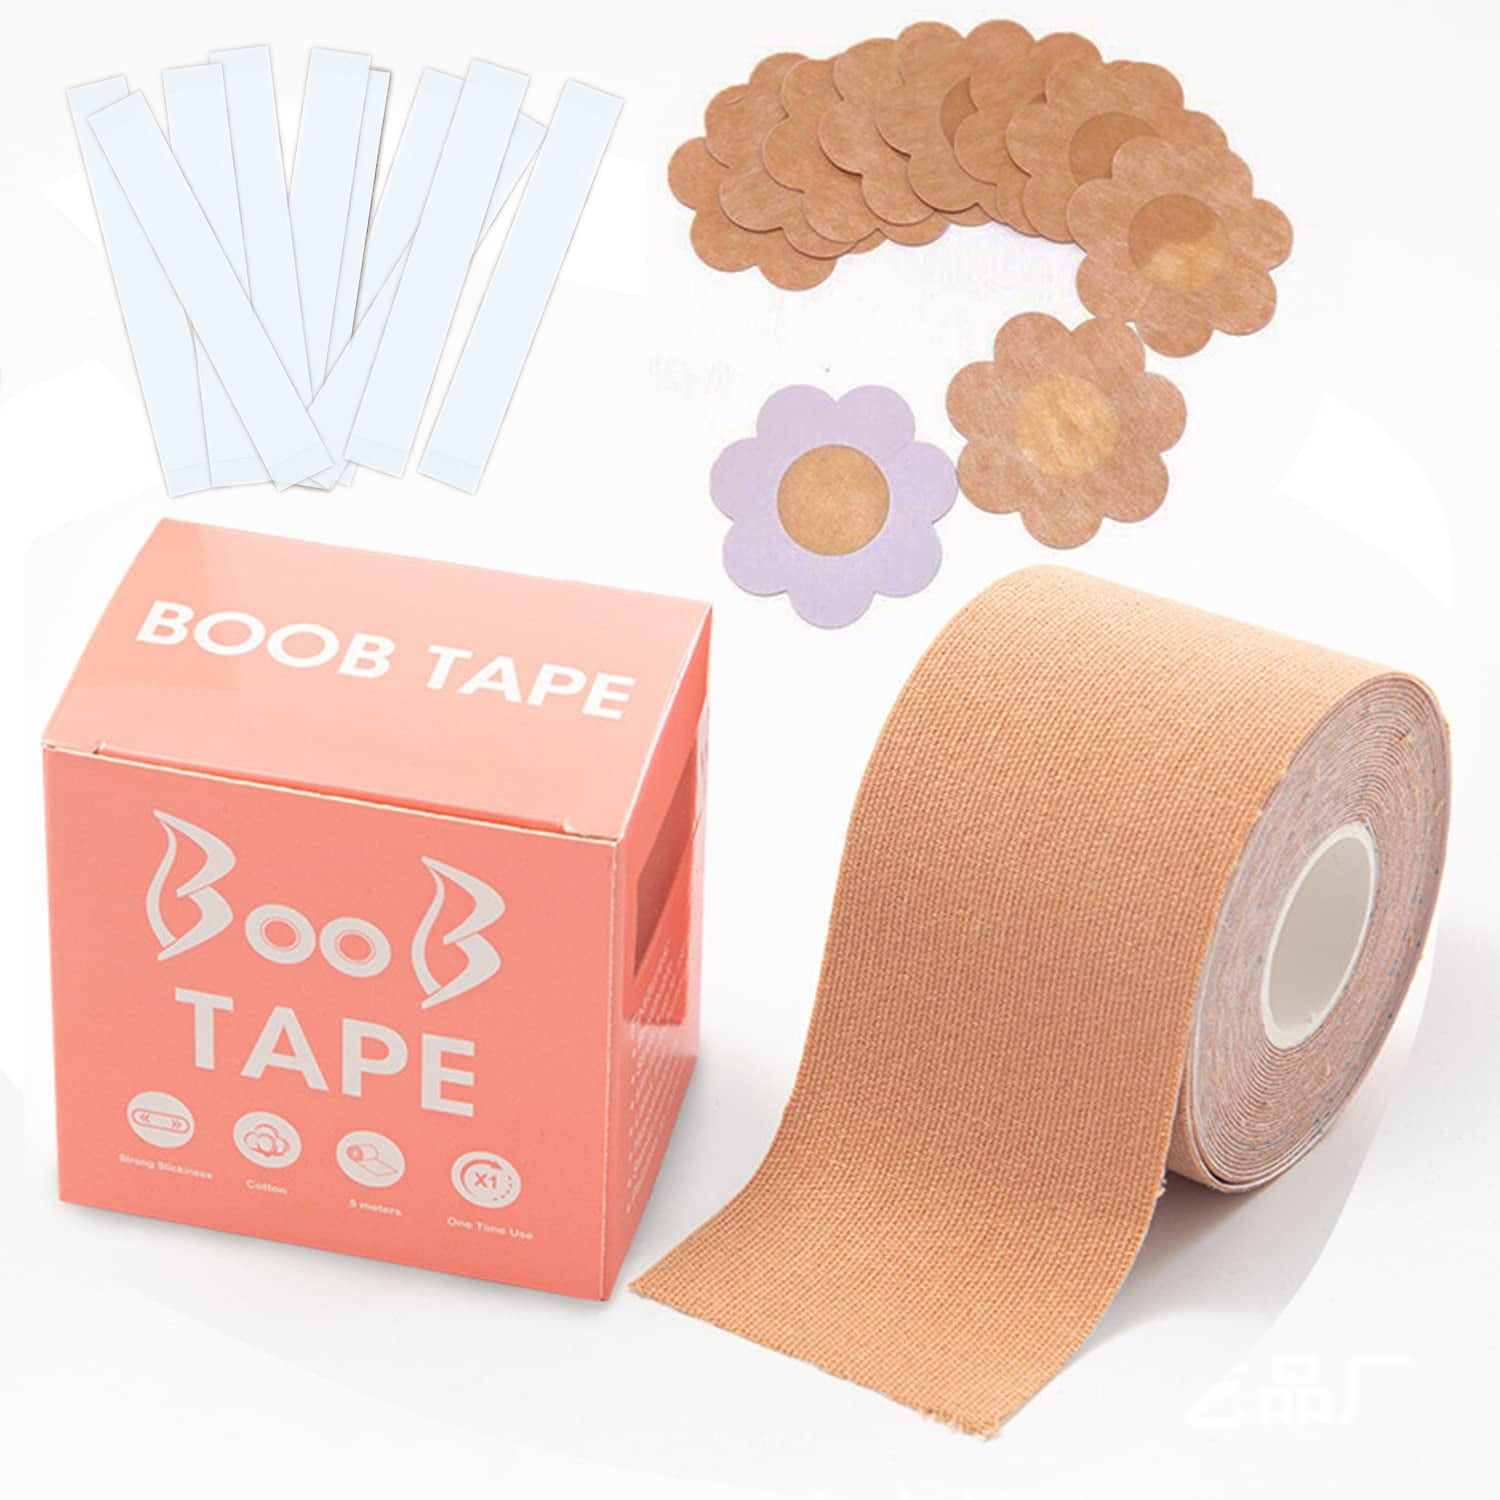 9 best boob tapes for a reliable hold and comfy lift